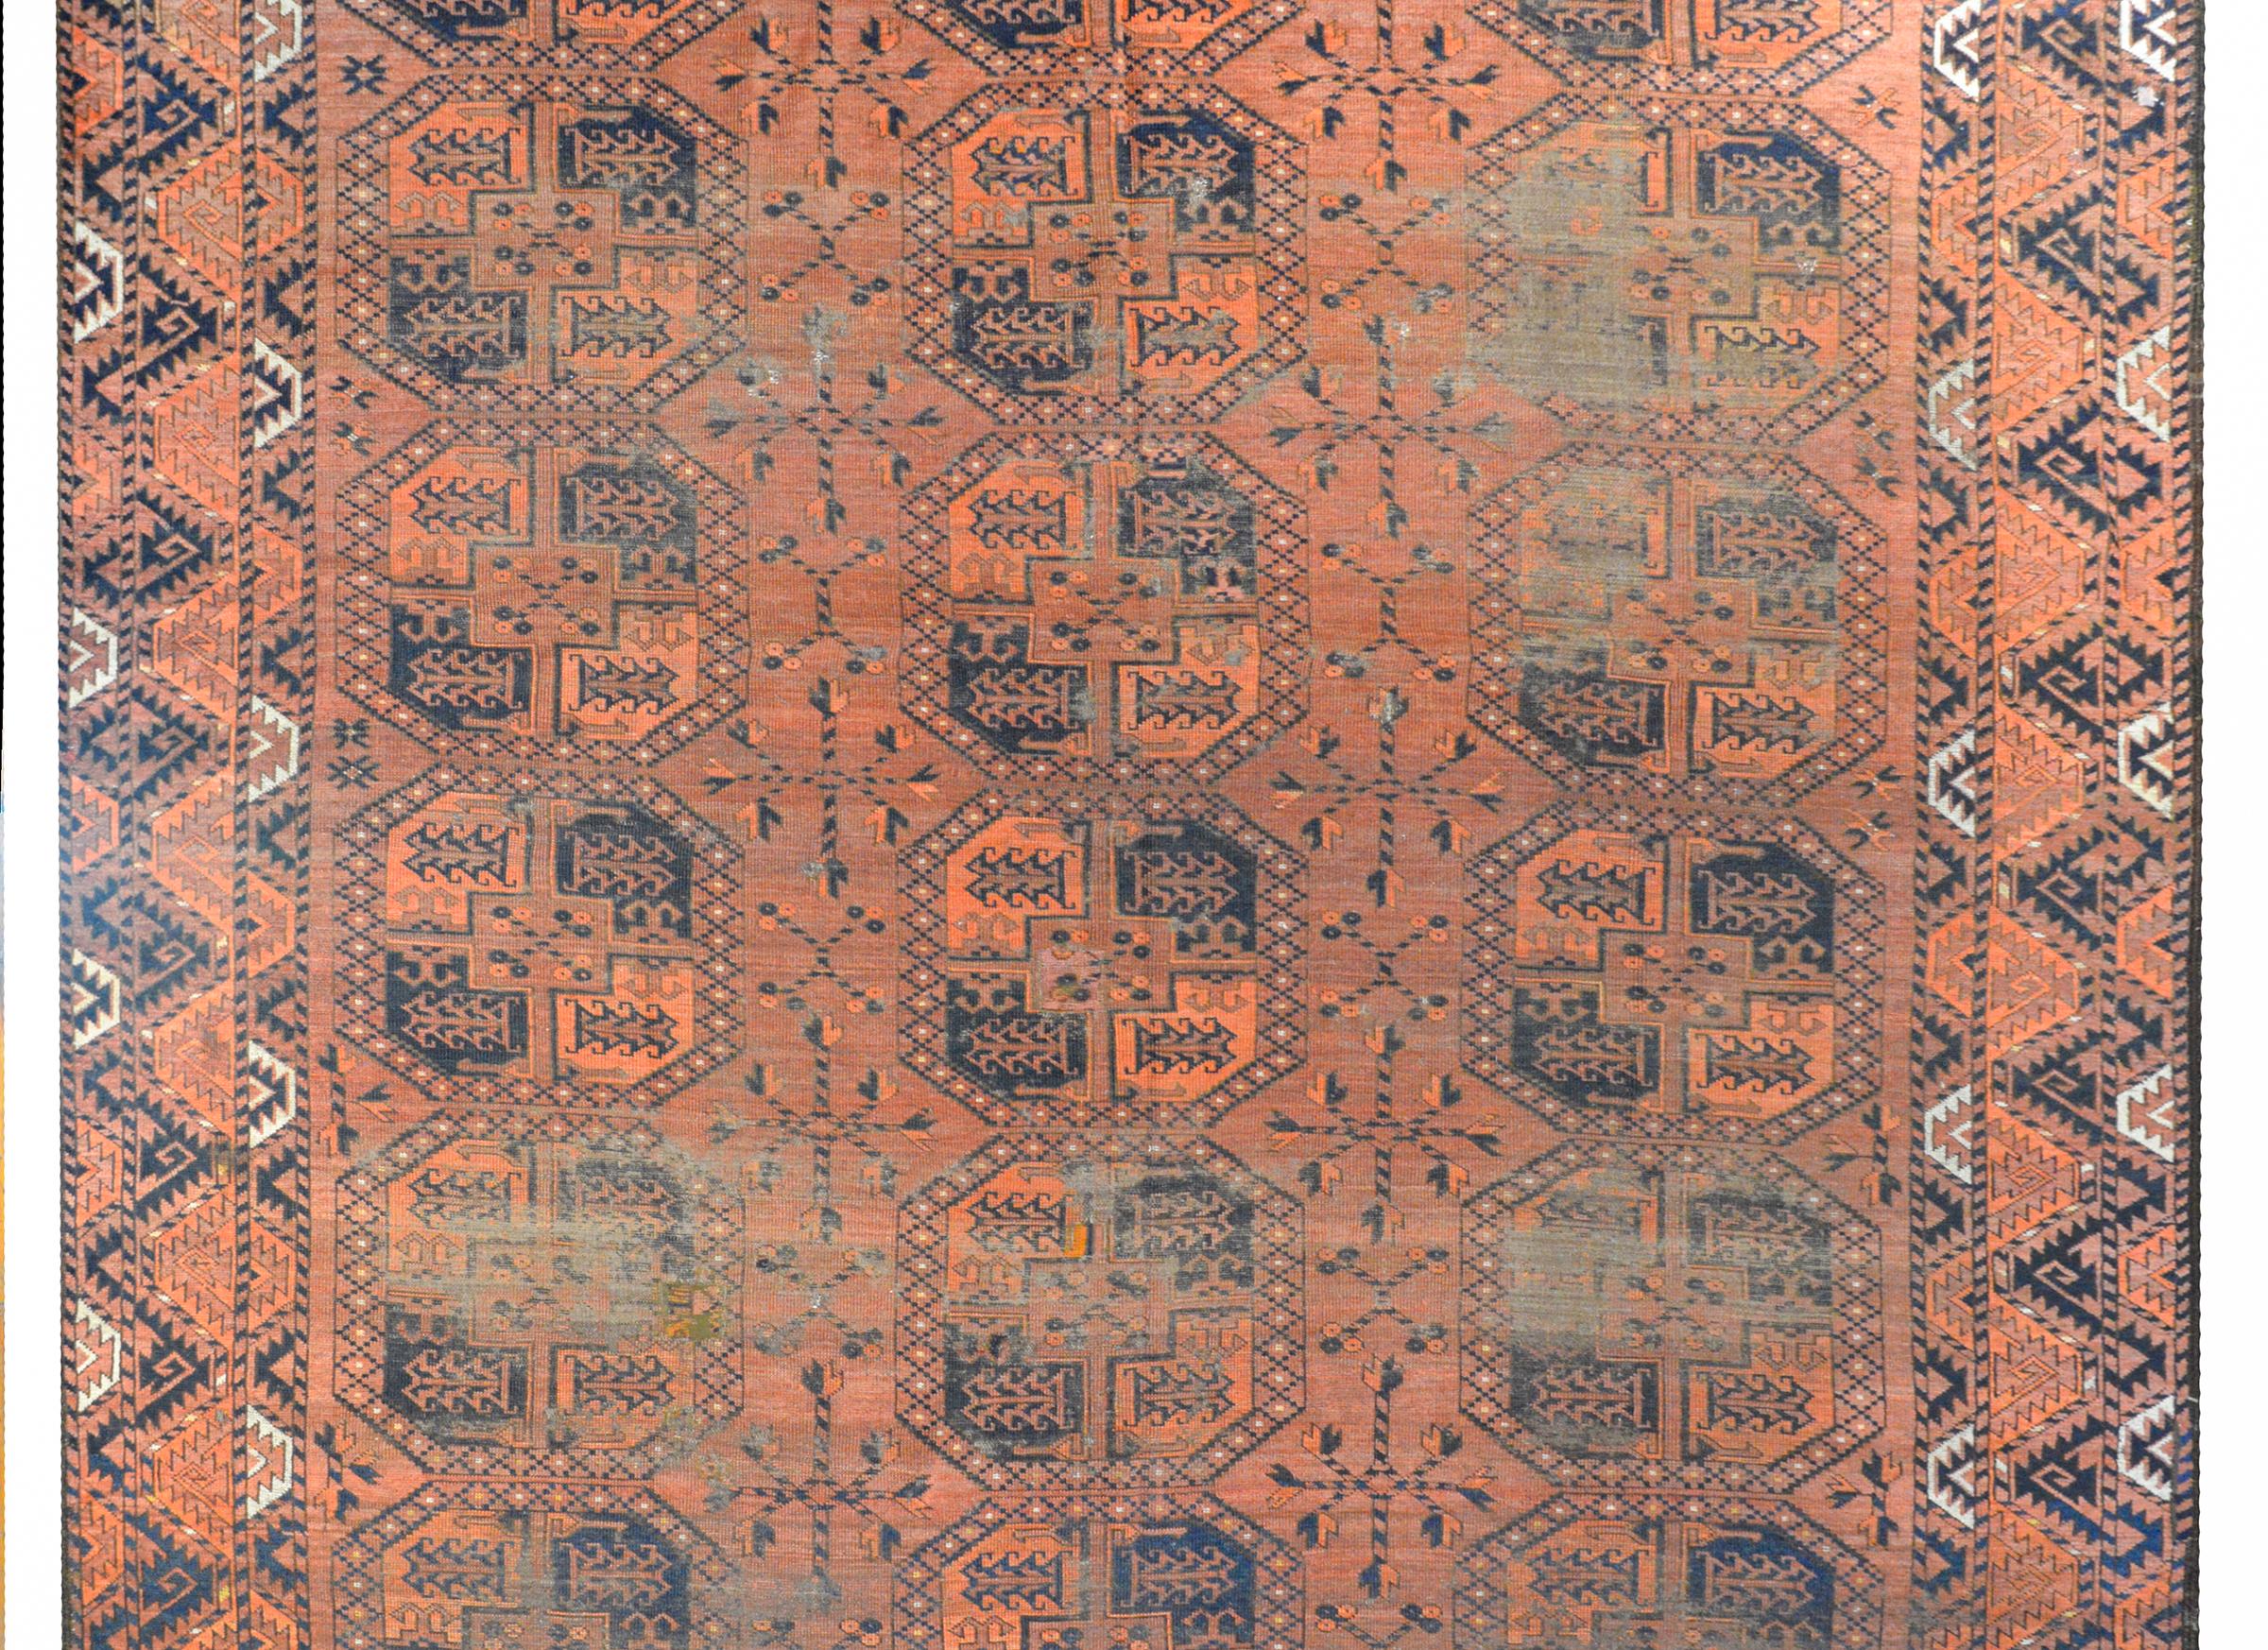 A fantastic early 20th century Afghani Ersari rug with multiple all-over crimson and indigo octagonal medallions amidst a field of stylized flowers and scrolling vines all woven in crimson and indigo on a pale crimson background. The border is